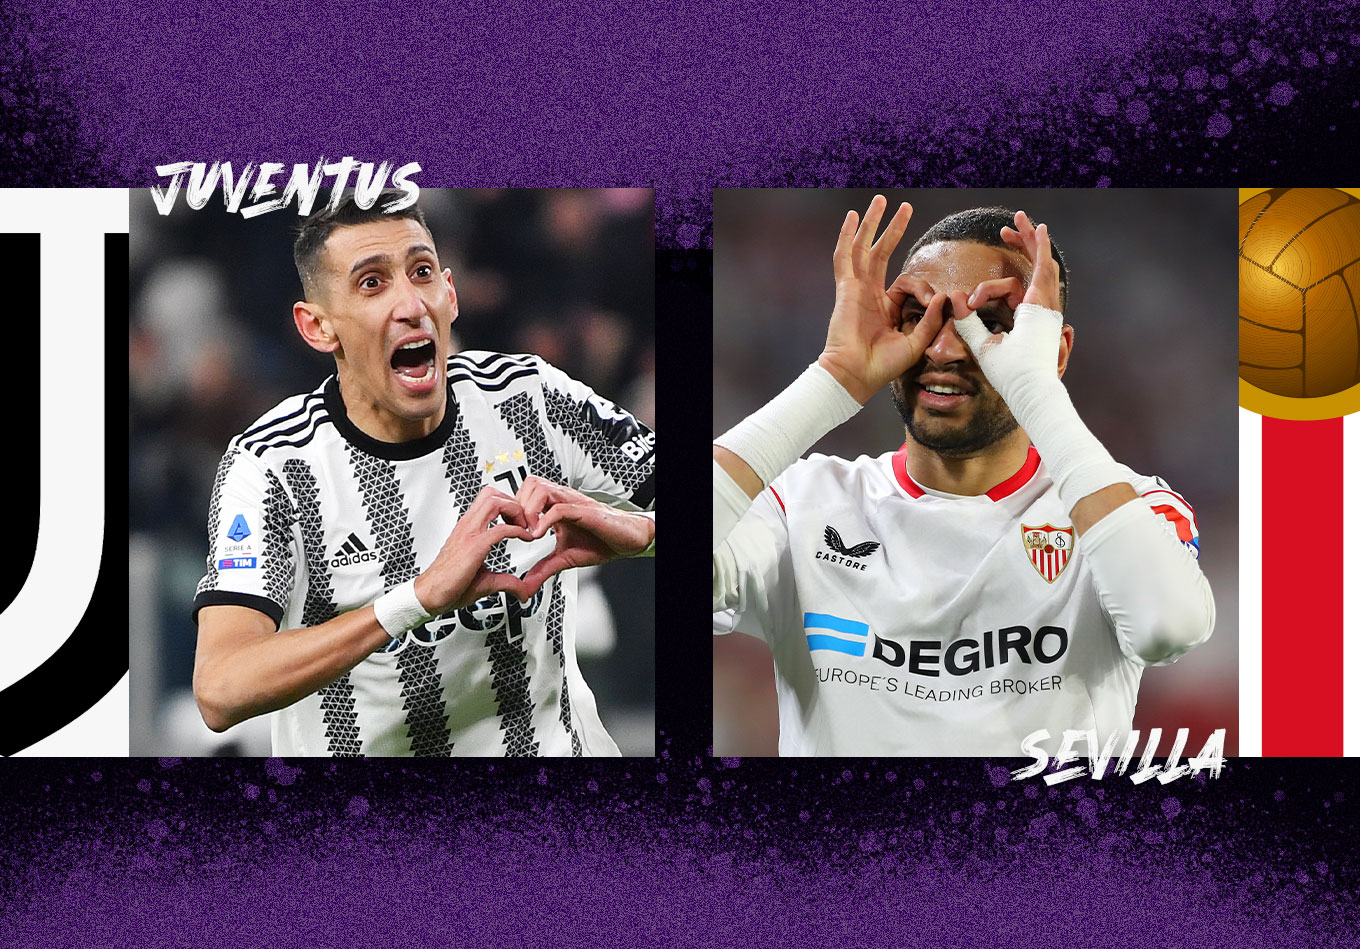 Juventus vs Sevilla: Prediction and Preview | The Analyst